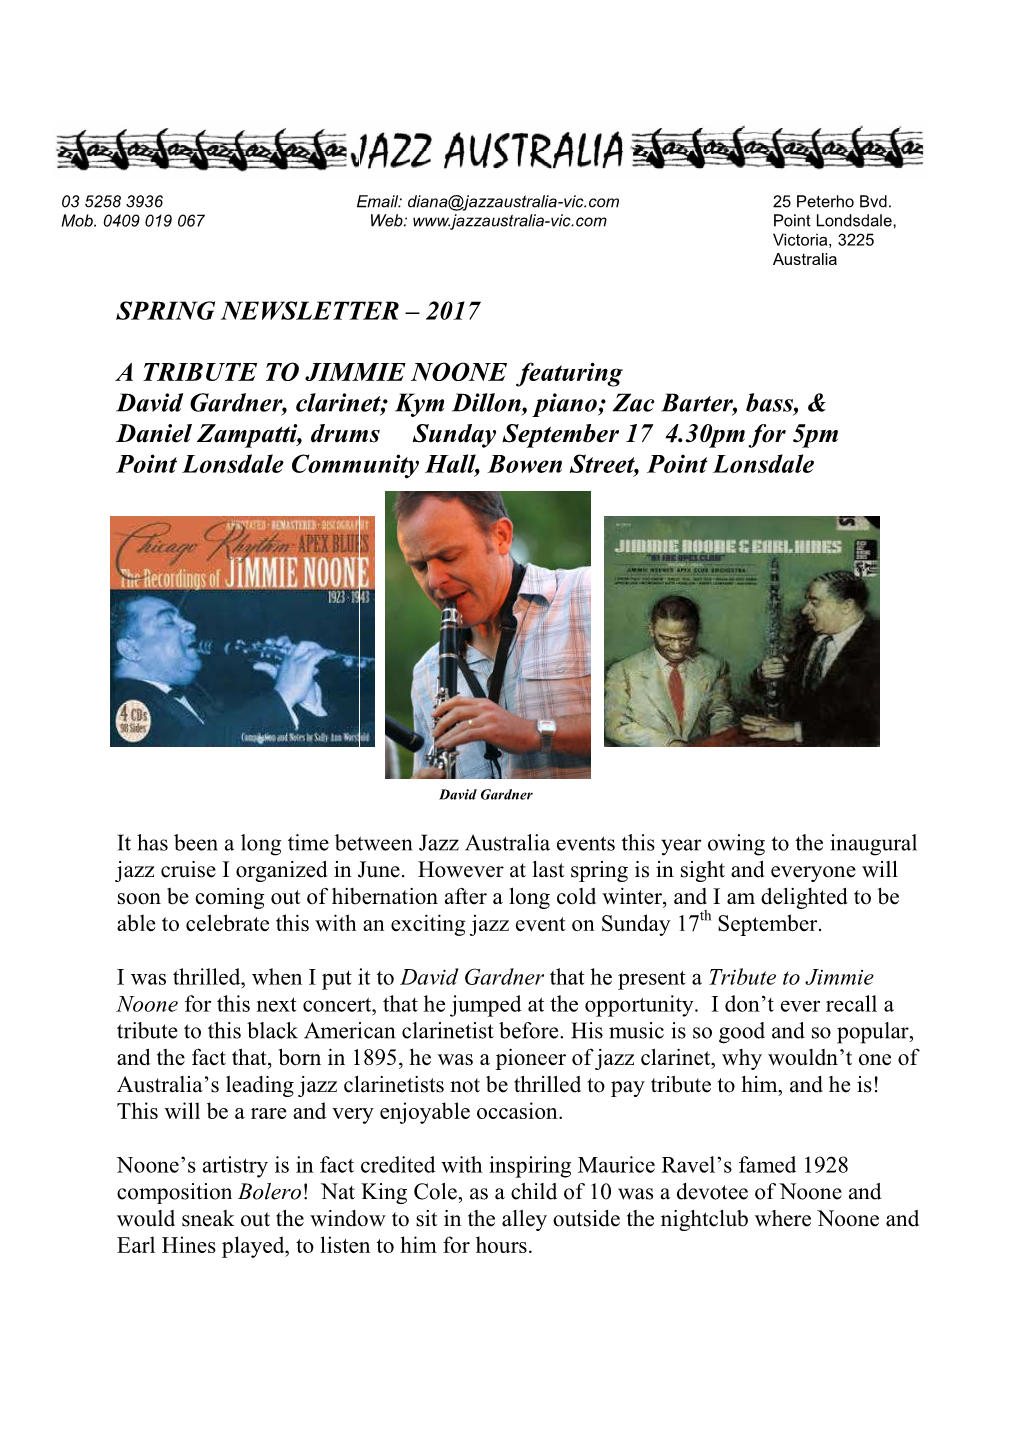 Spring Newsletter a Tribute To